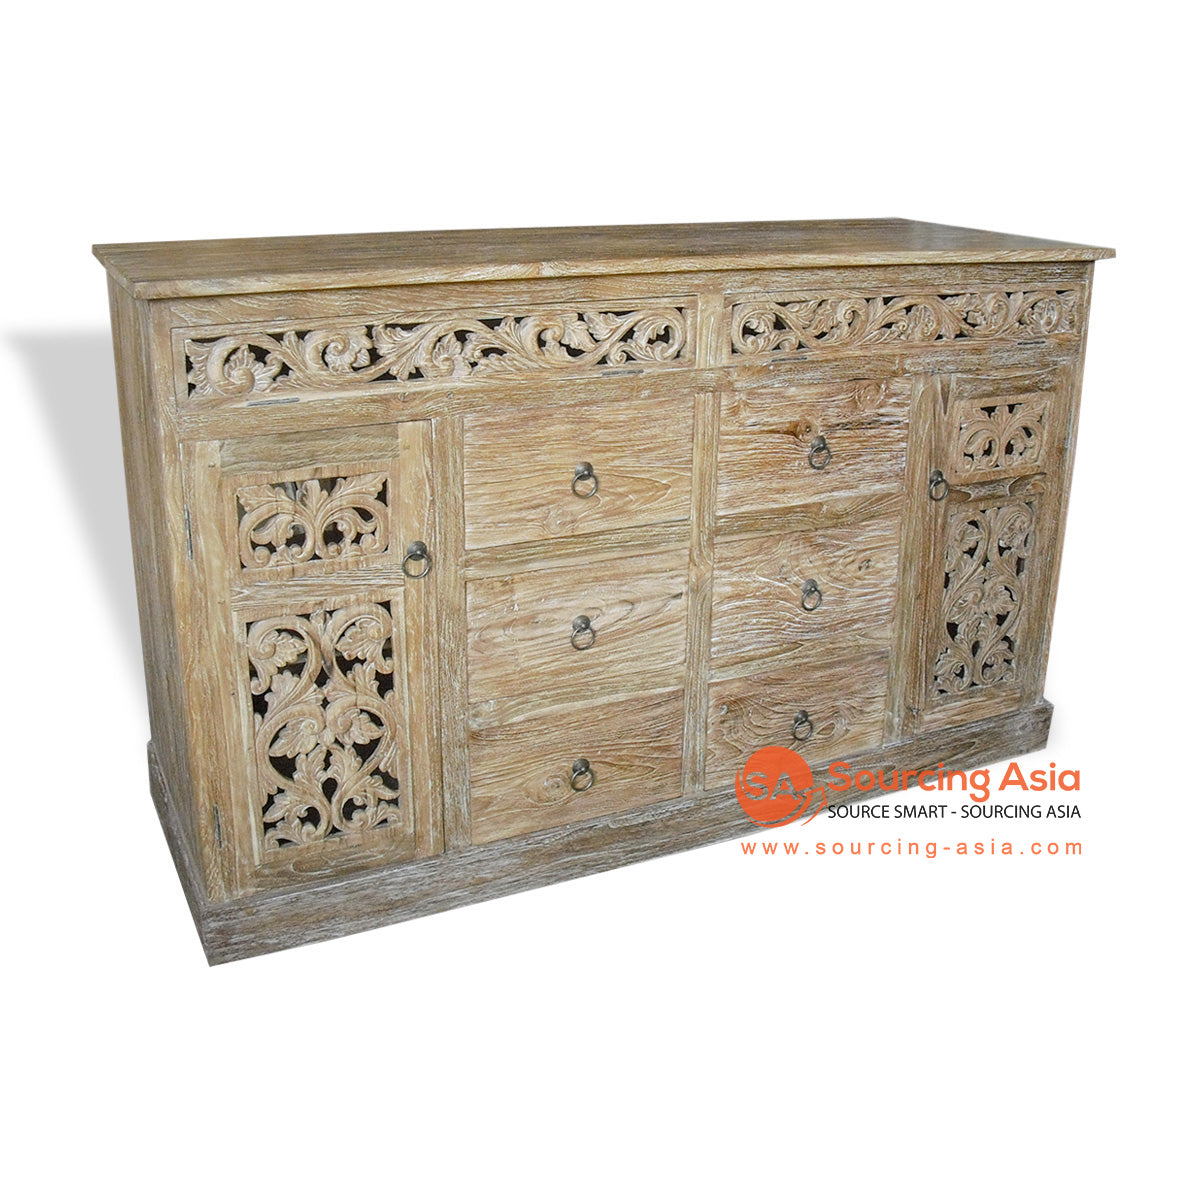 KYT-JQSP001 NATURAL RECYCLED TEAK WOOD TWO DOORS AND SIX DRAWERS CARVED BUFFET